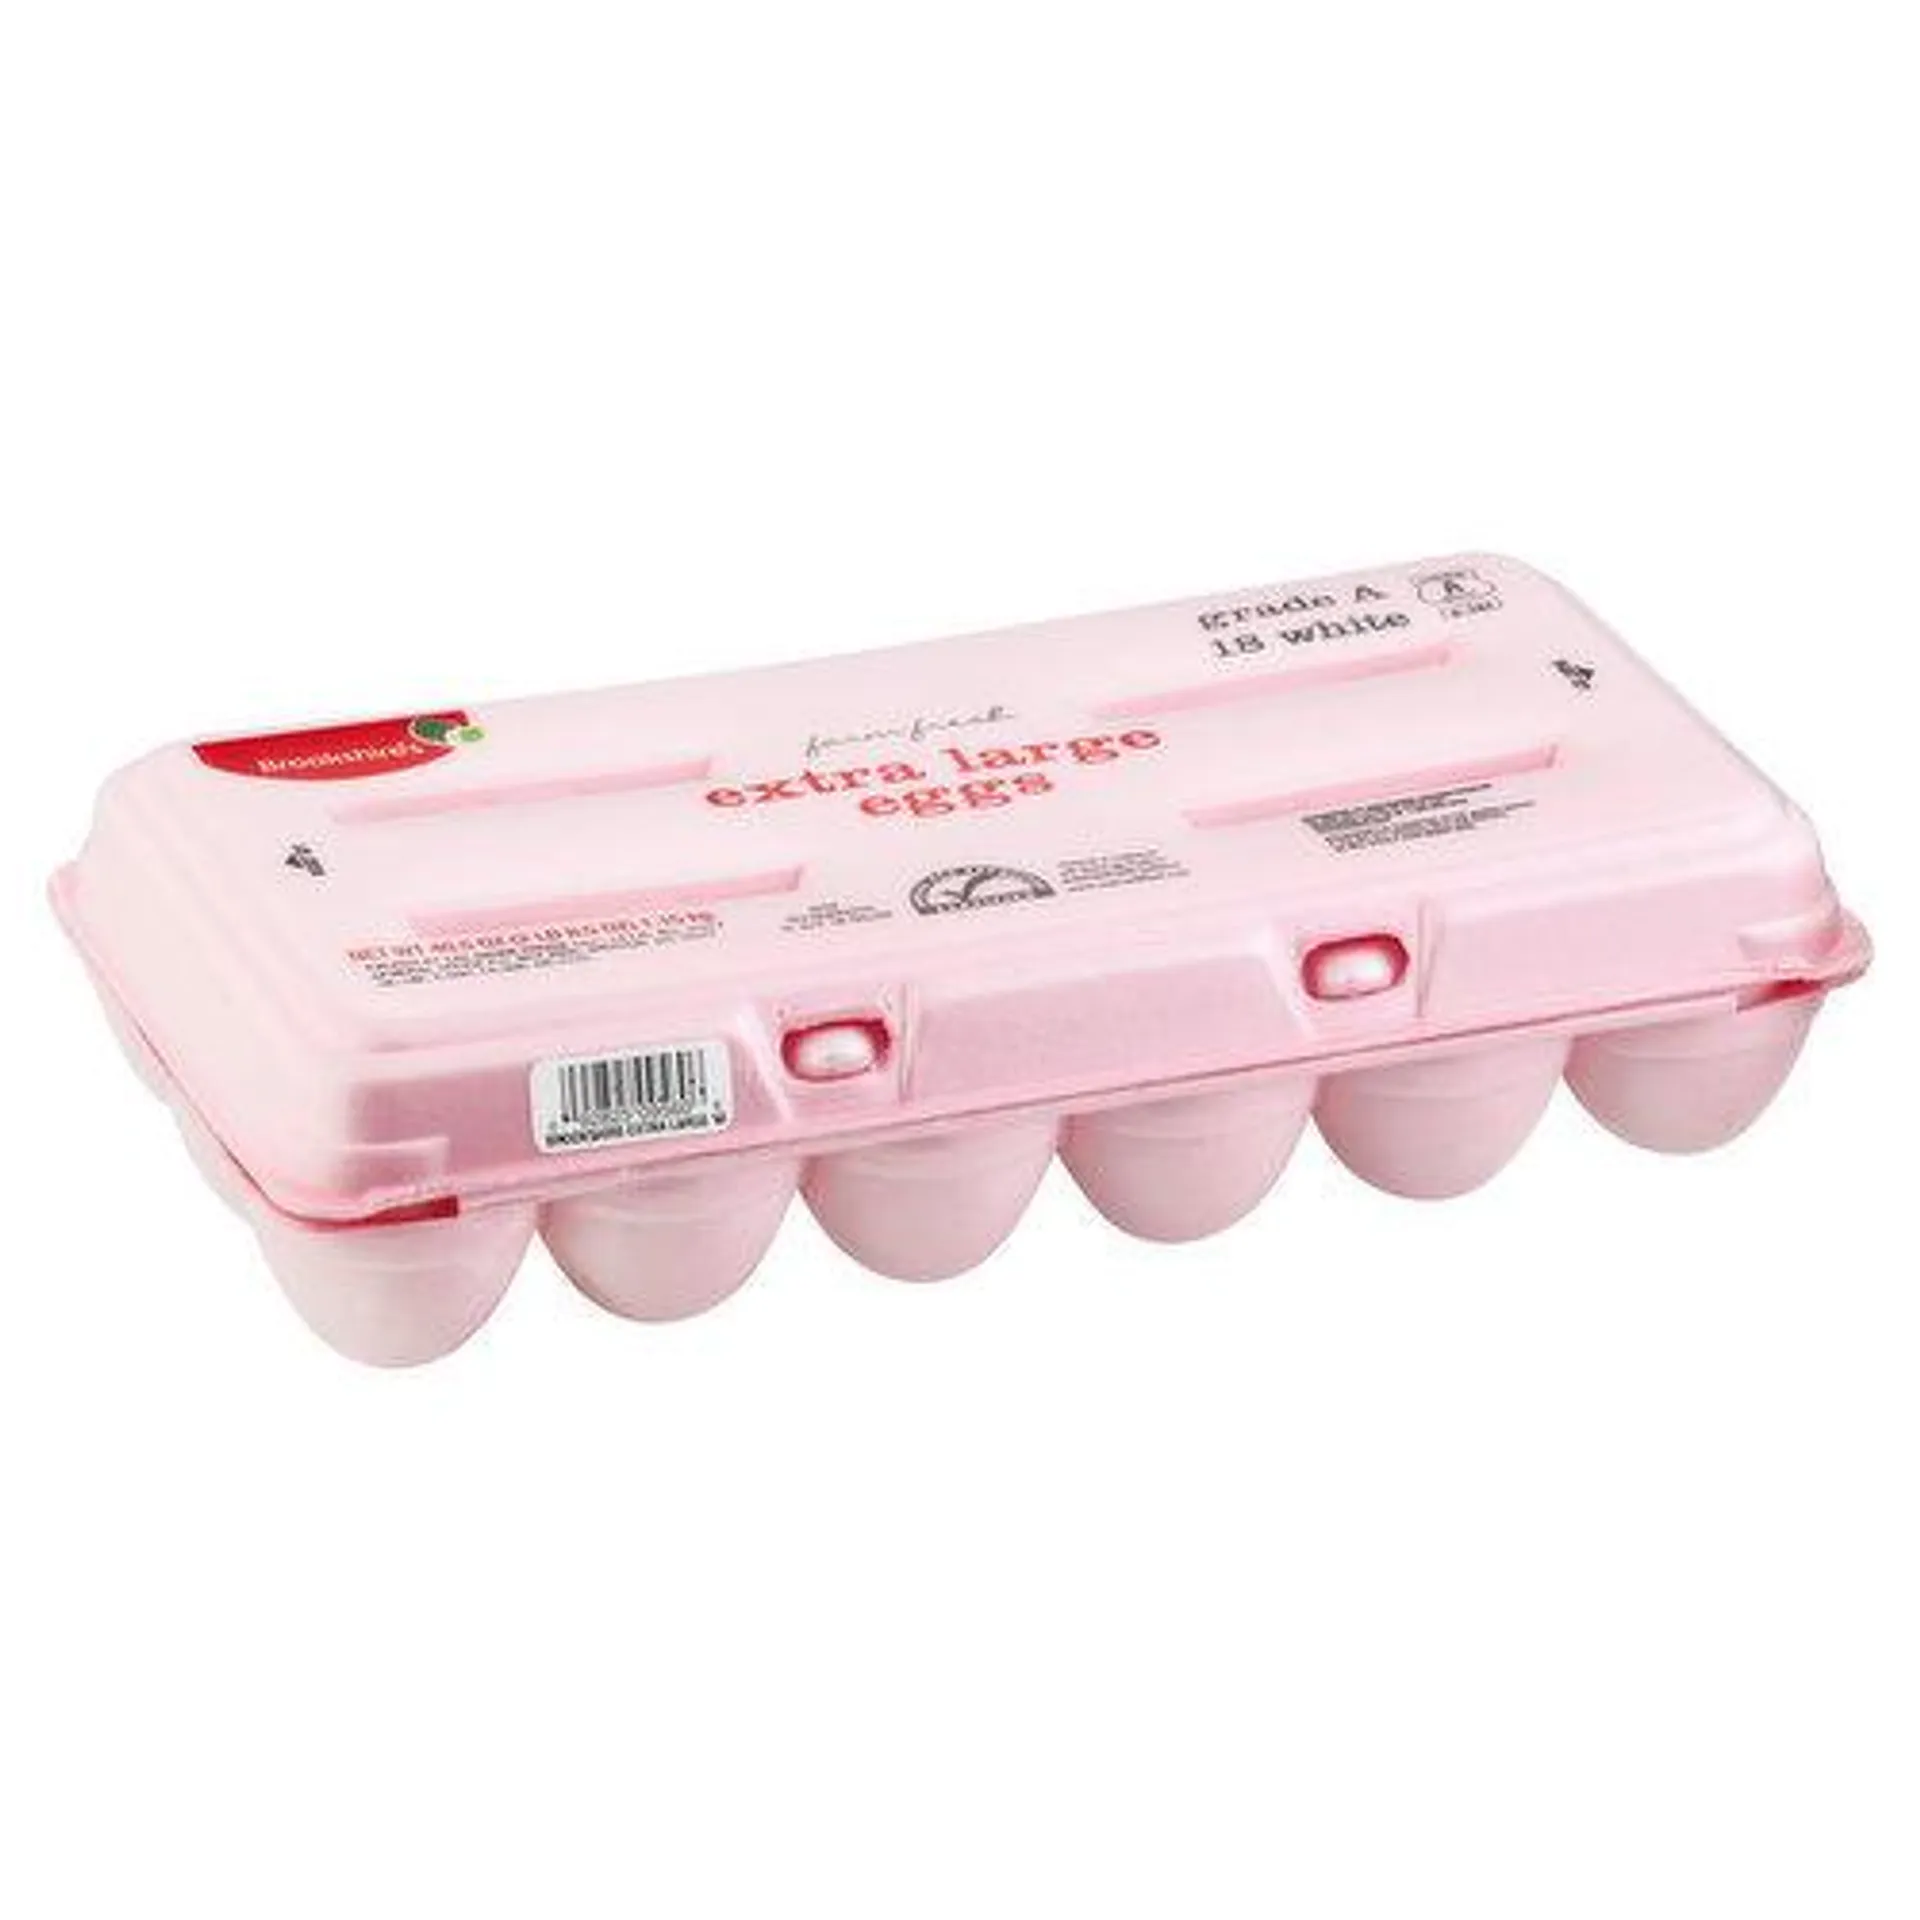 Brookshire's Extra Large Eggs - 18 Each